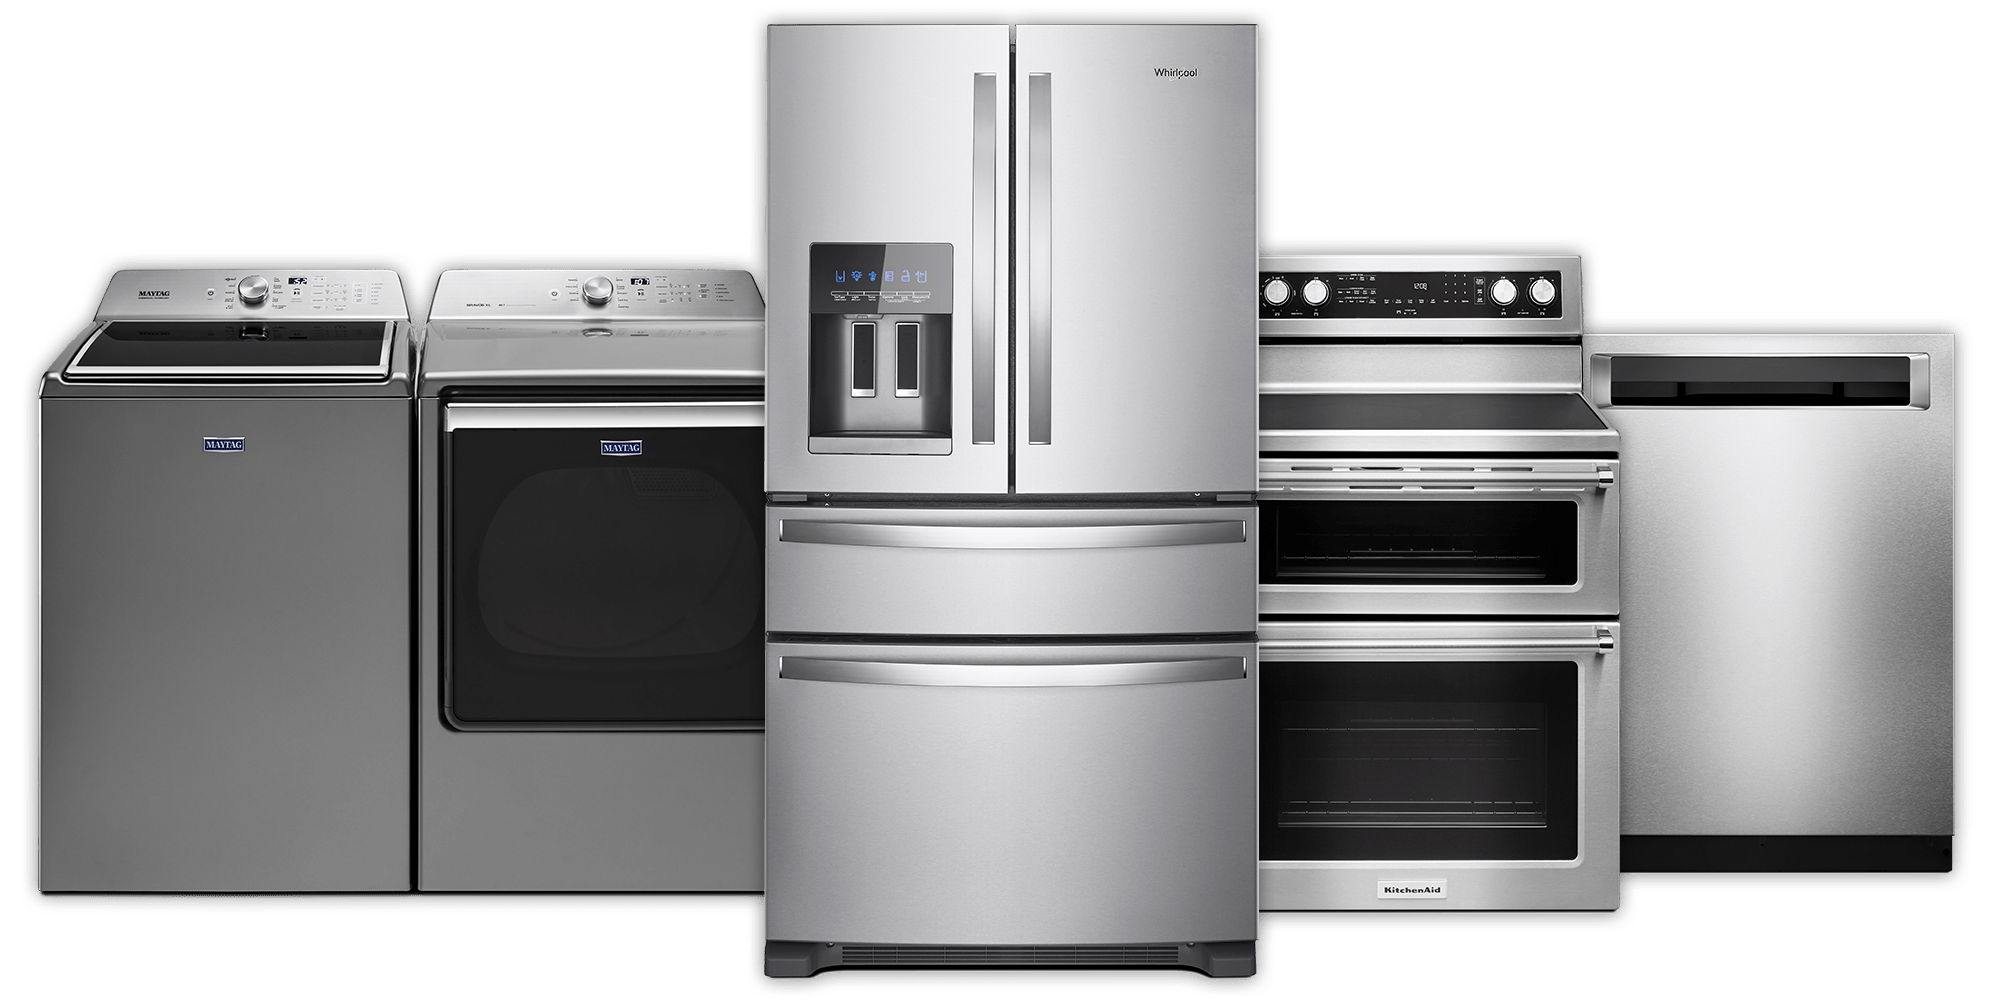 Finding the Most Economical Home Appliances over the